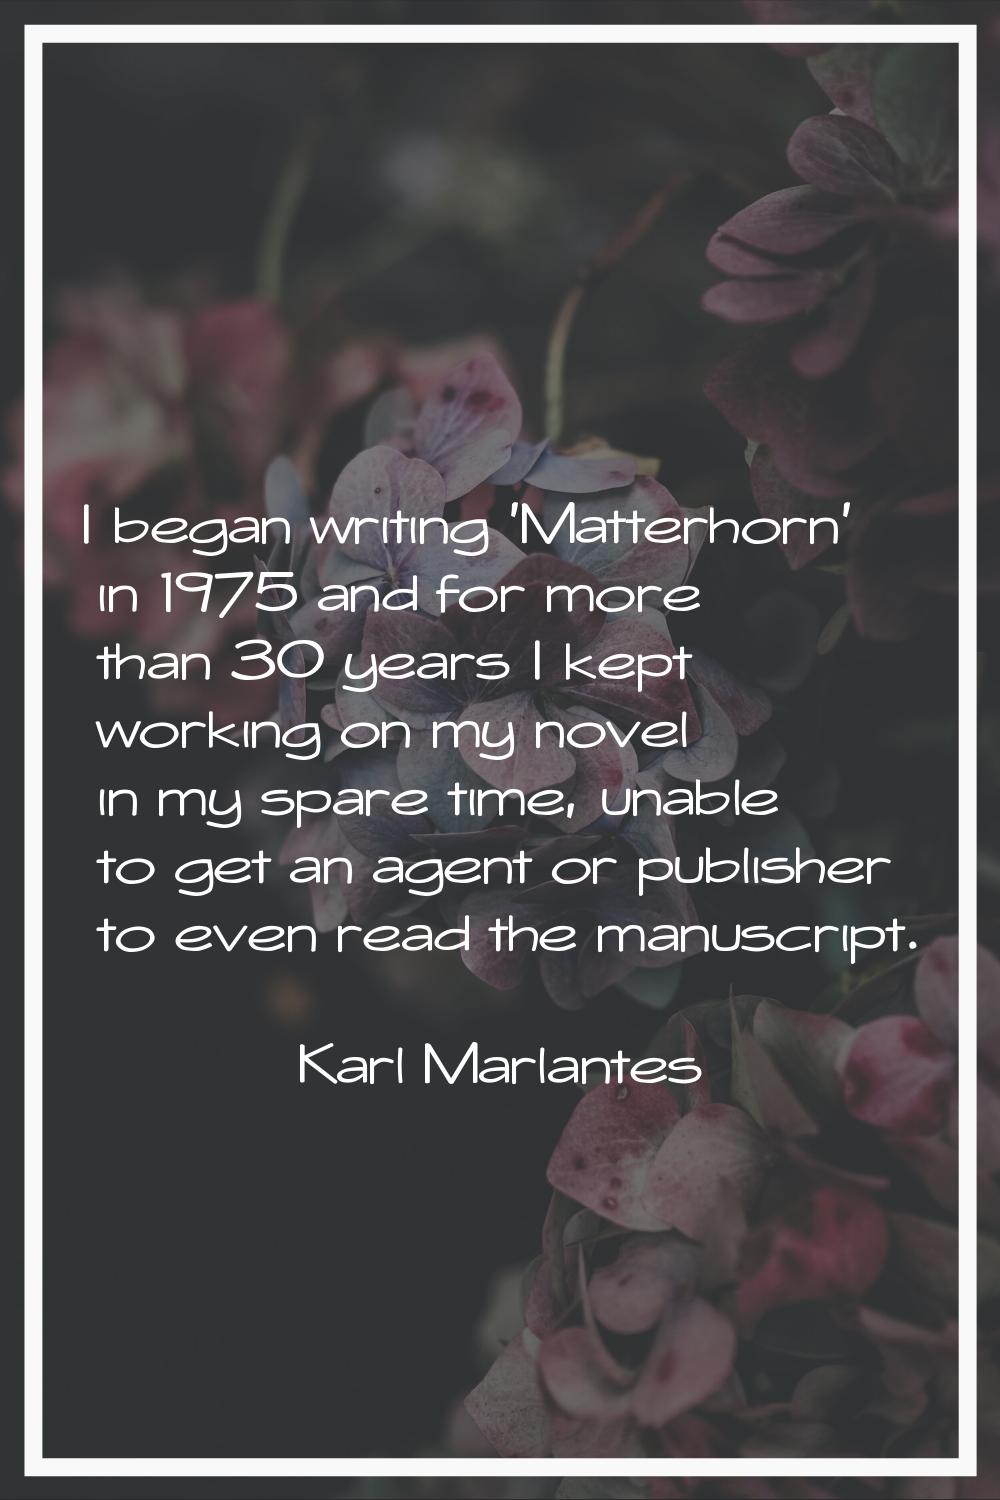 I began writing 'Matterhorn' in 1975 and for more than 30 years I kept working on my novel in my sp